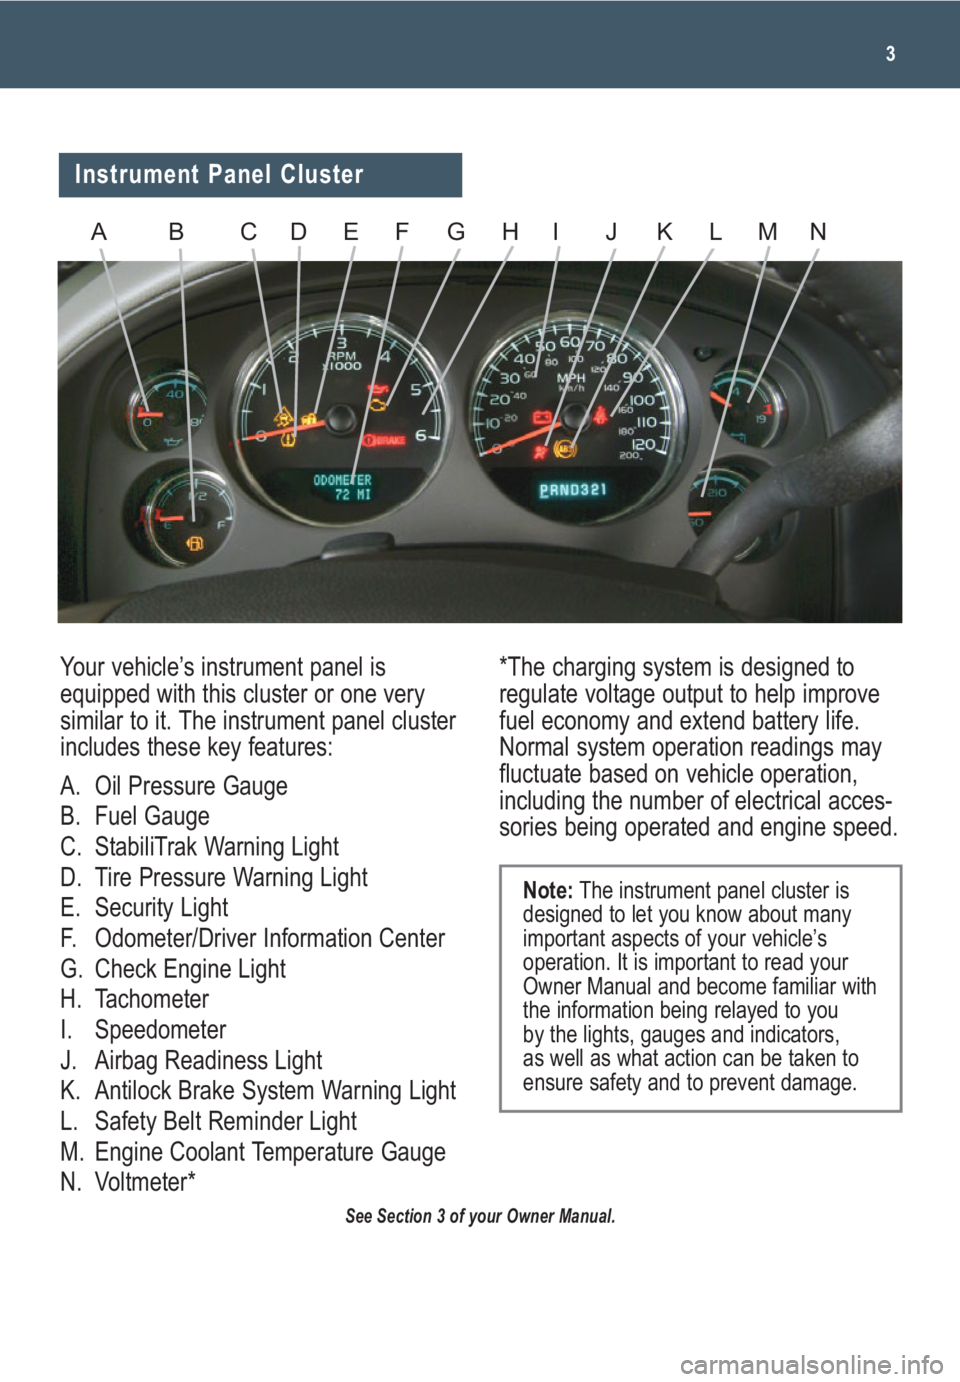 GMC YUKON 2009  Get To Know Guide 3
Your vehicle’s instrument panel is
equipped with this cluster or one very
similar to it. The instrument panel cluster
includes these key features:
A. Oil Pressure Gauge
B. Fuel Gauge
C. StabiliTra